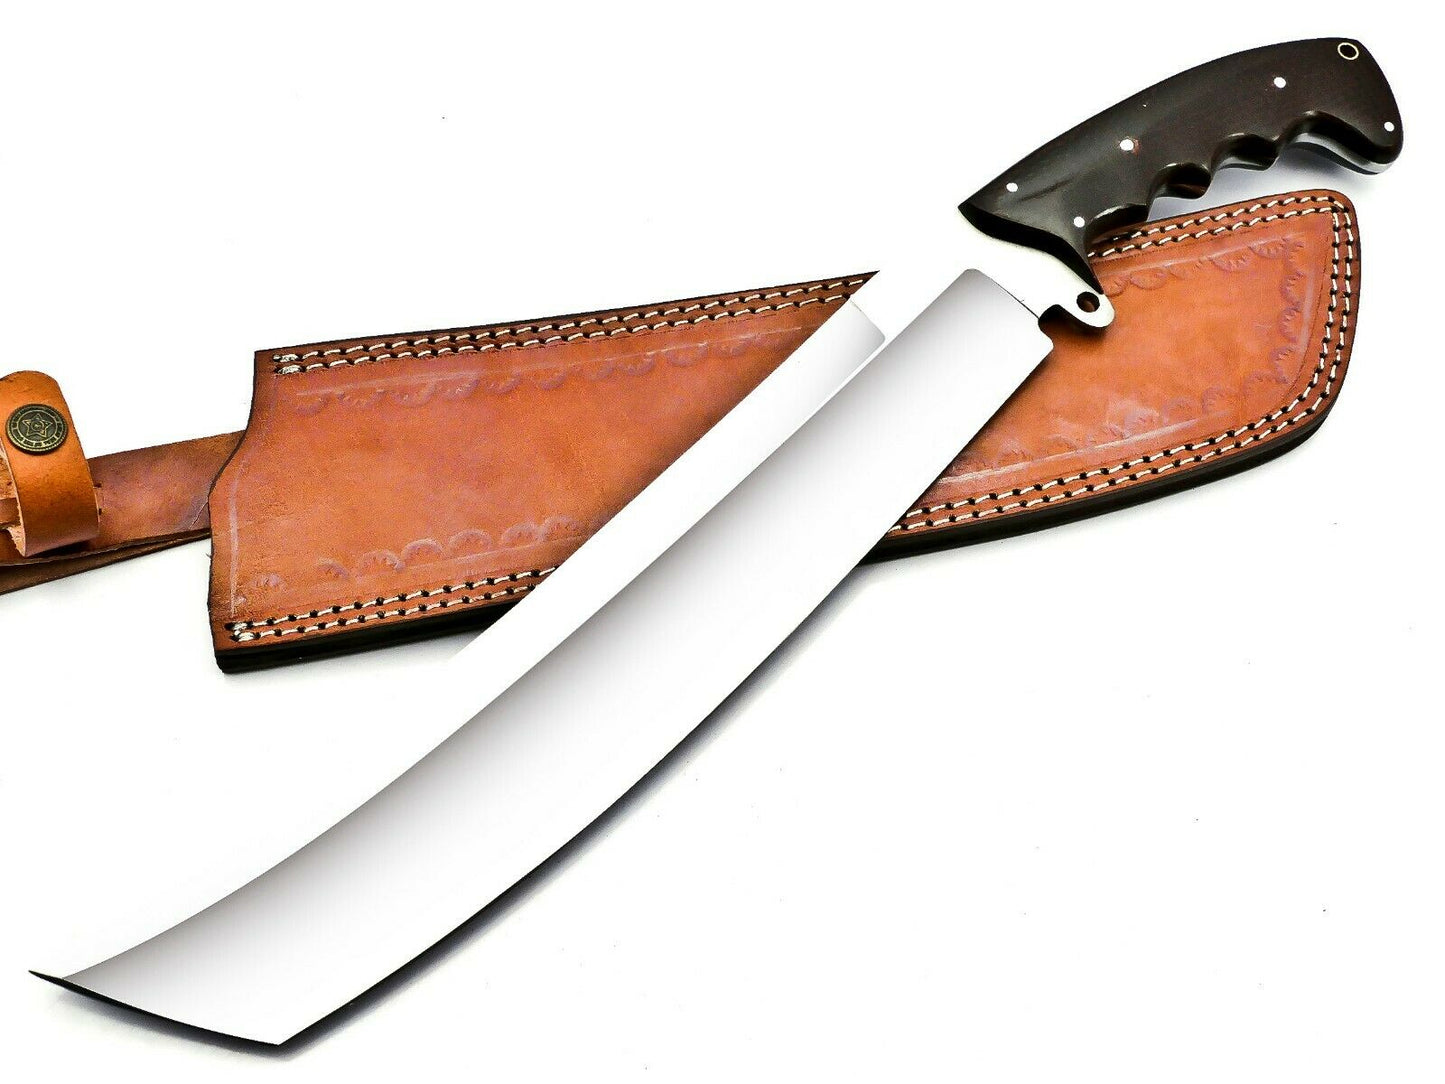 Versatile Full Tang Handmade Machete: Ideal for Hunting, Tactical, Survival, and Collectible Use - Includes 18” Razor-Sharp Blade / Sheath